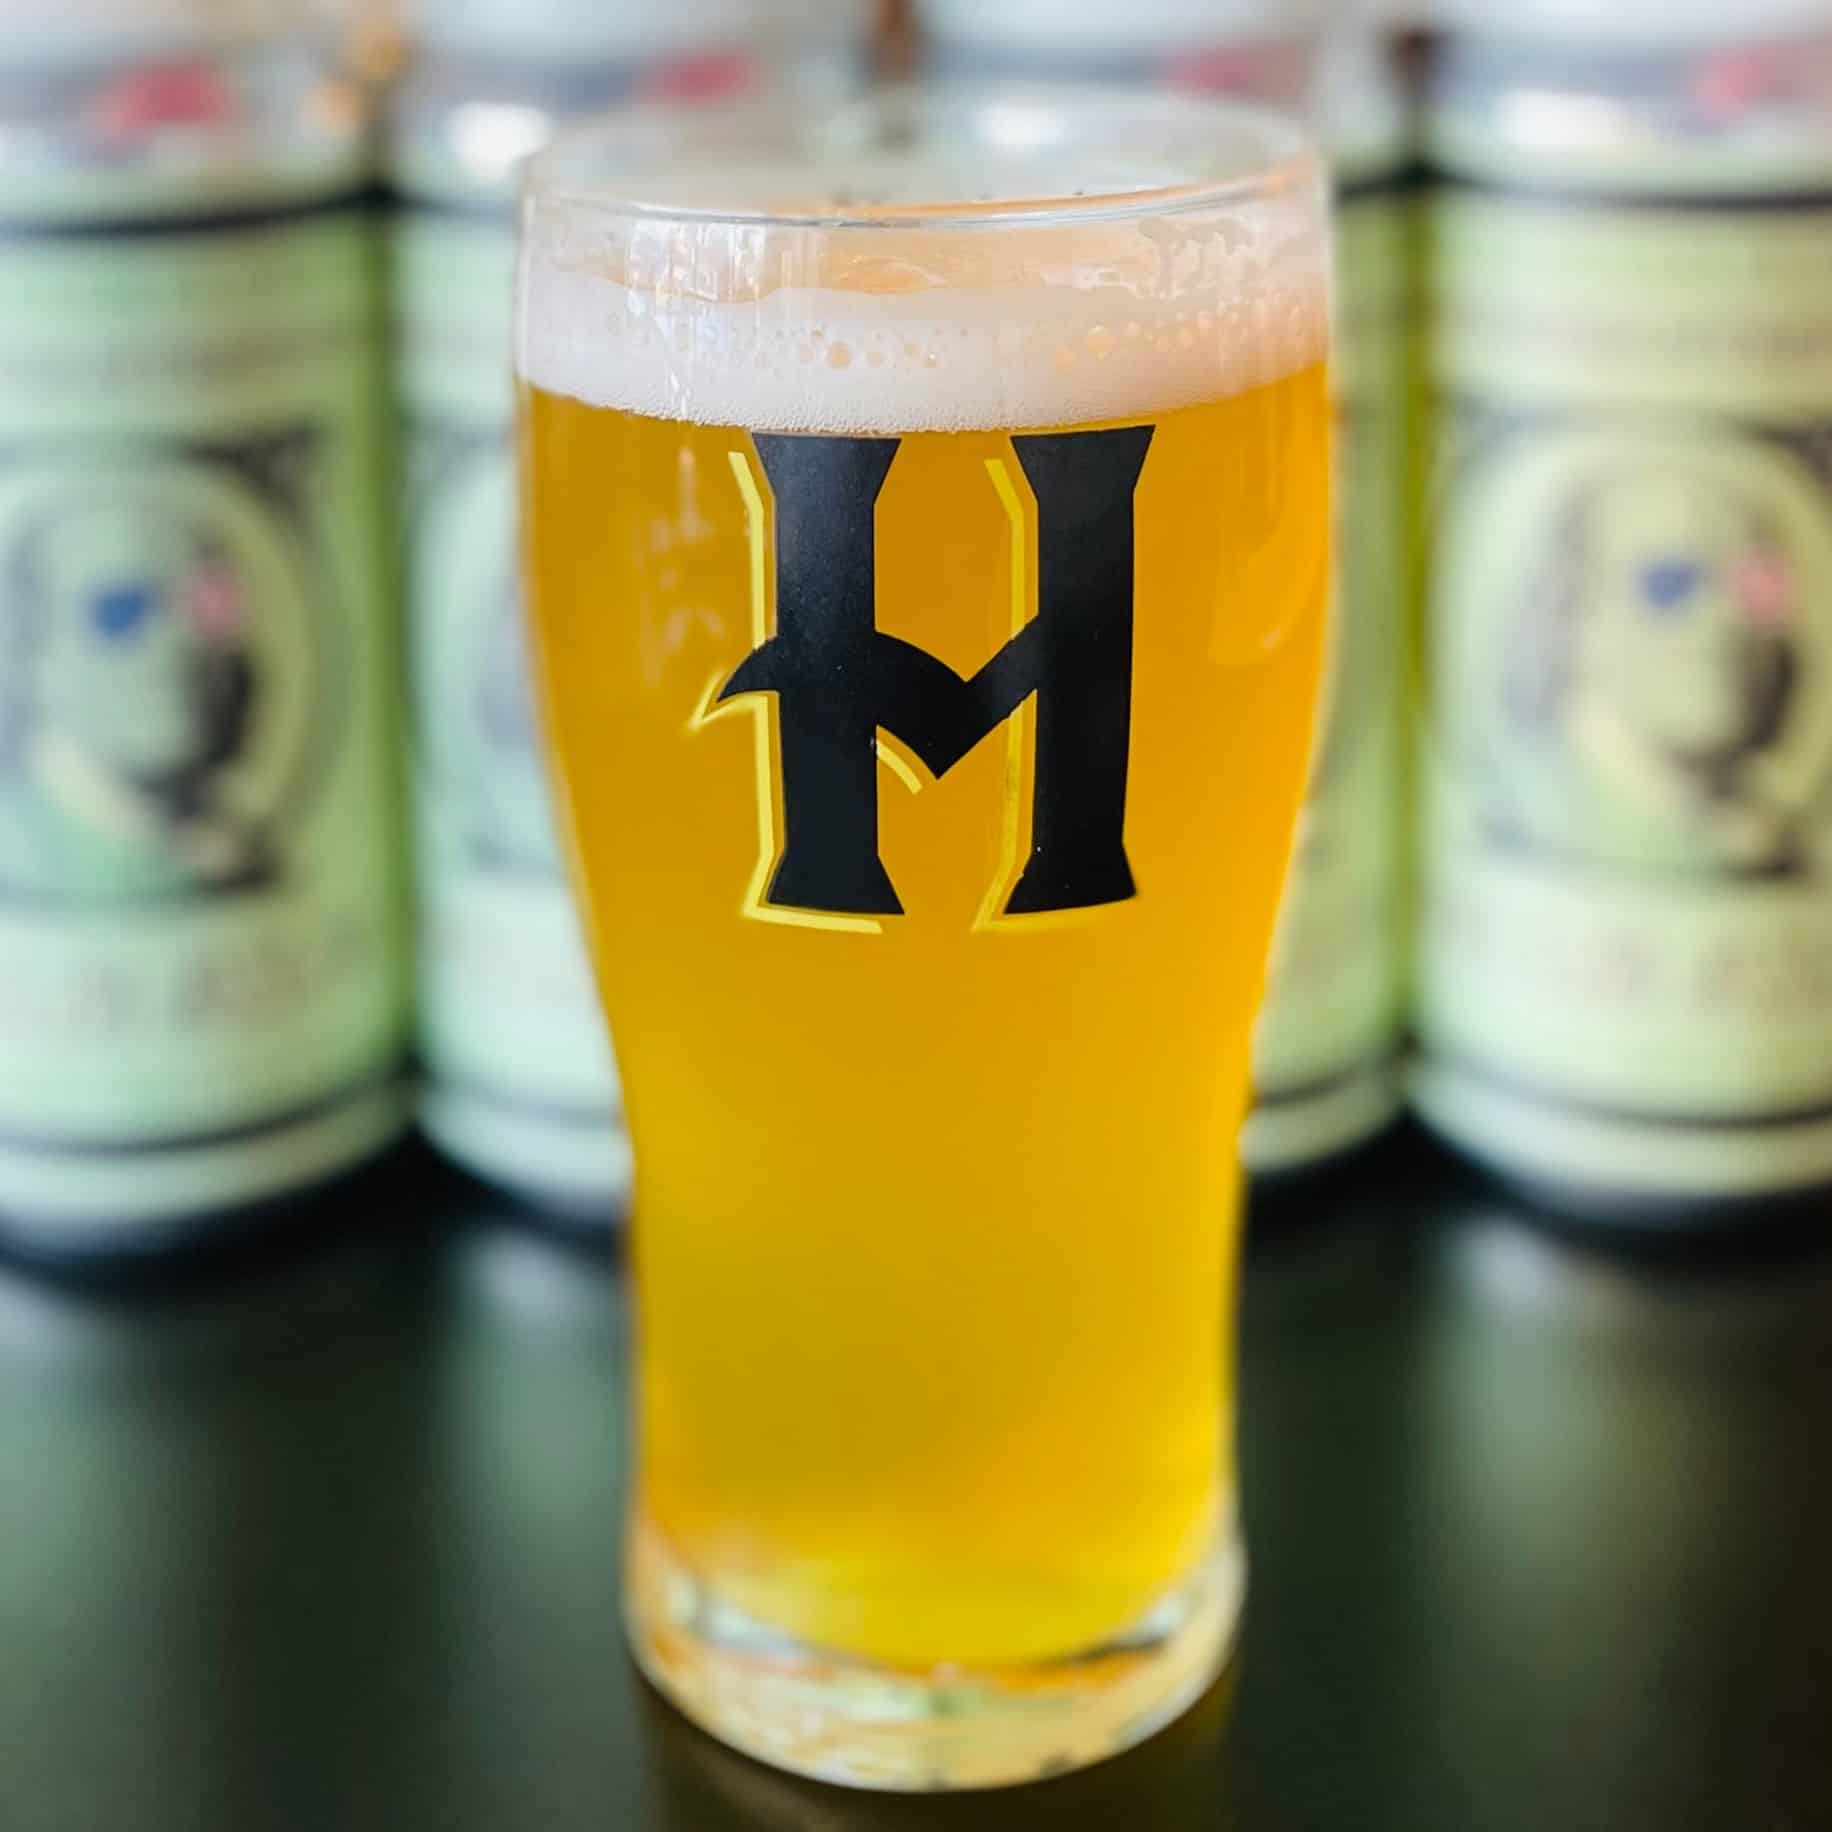 Hemauer Brewing Co. has their pale ale, Americanization, on tap starting today!